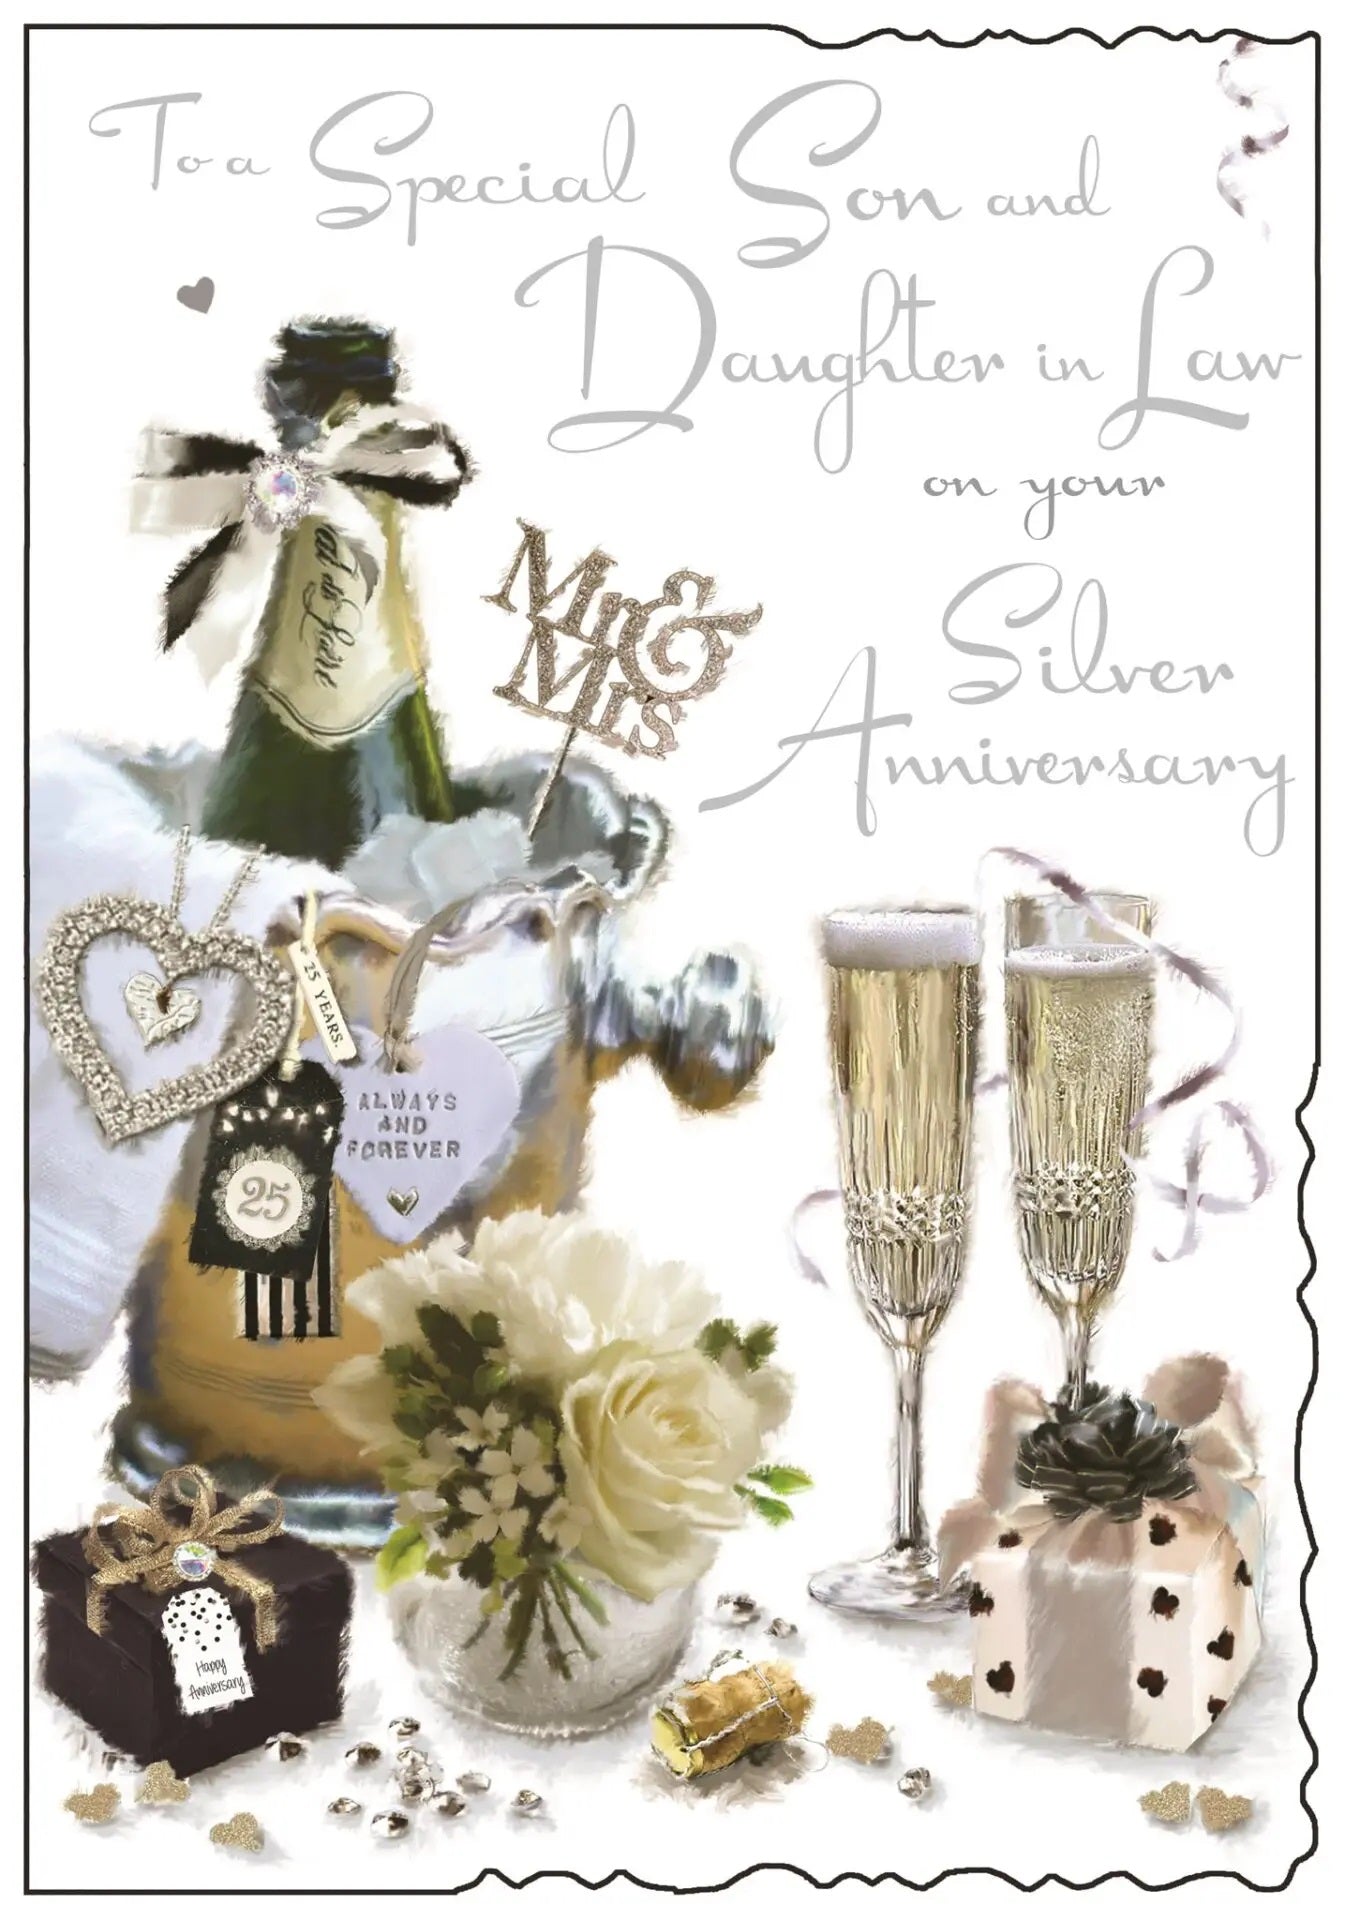 Son & Daughter-In-Law 25th Anniversary Card - Champagne, Gifts, And Flowers 